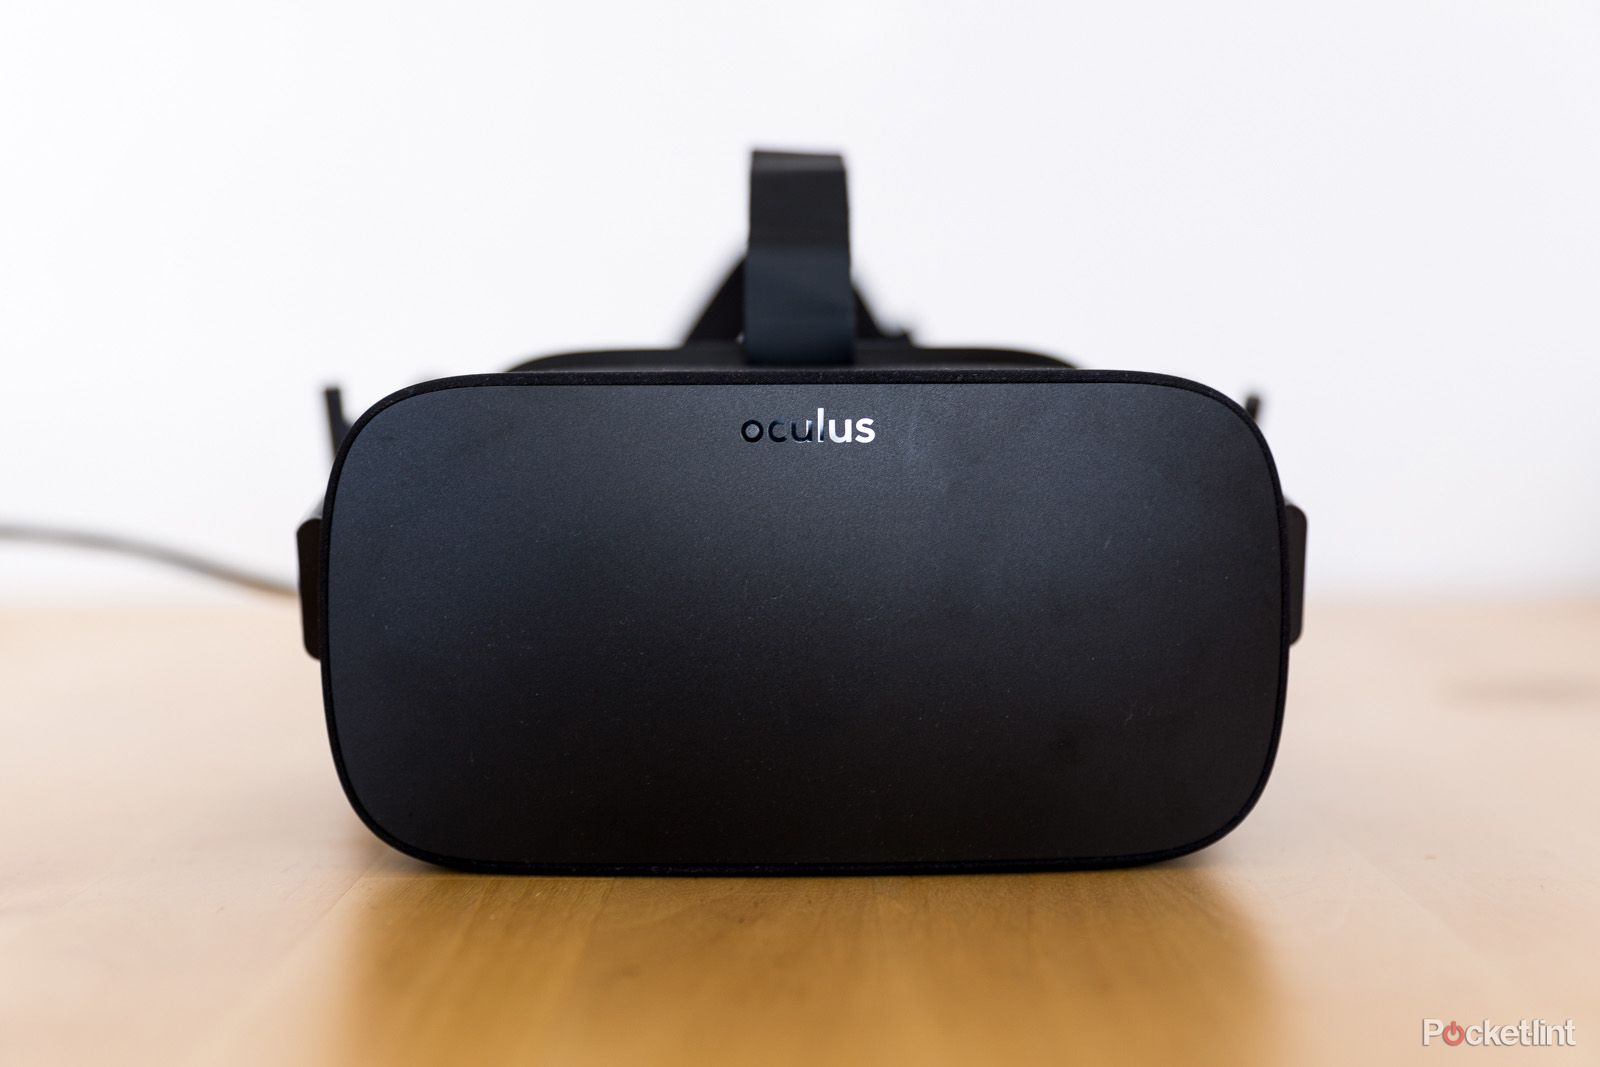 oculus just slashed prices for the rift headset and touch controllers image 1